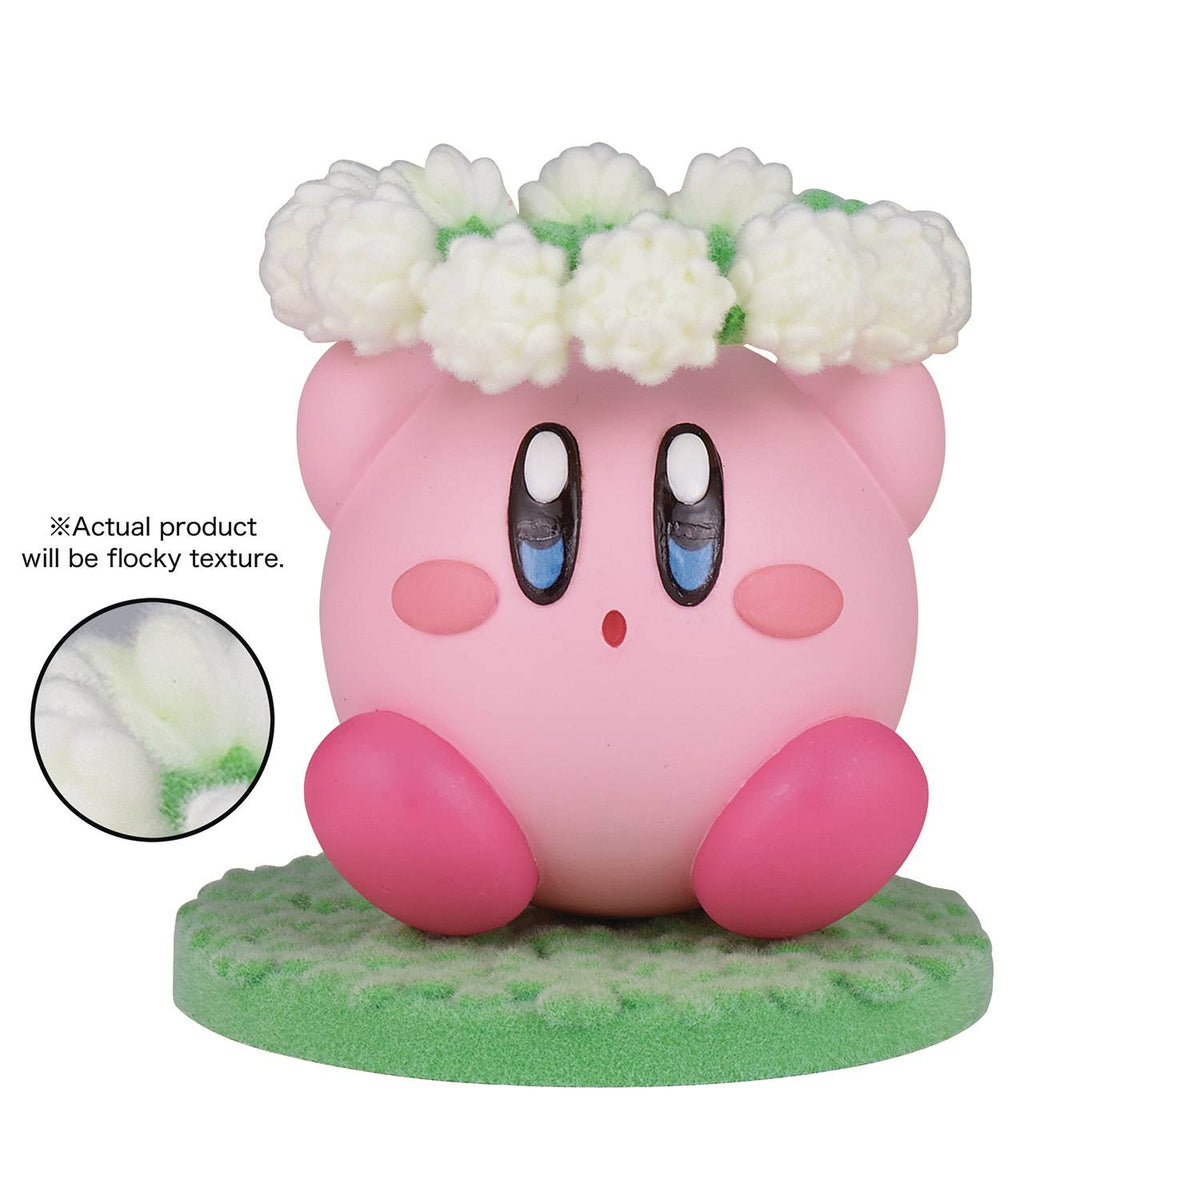 Fluffy Puffy: Kirby - In the Flower (Ver. B)